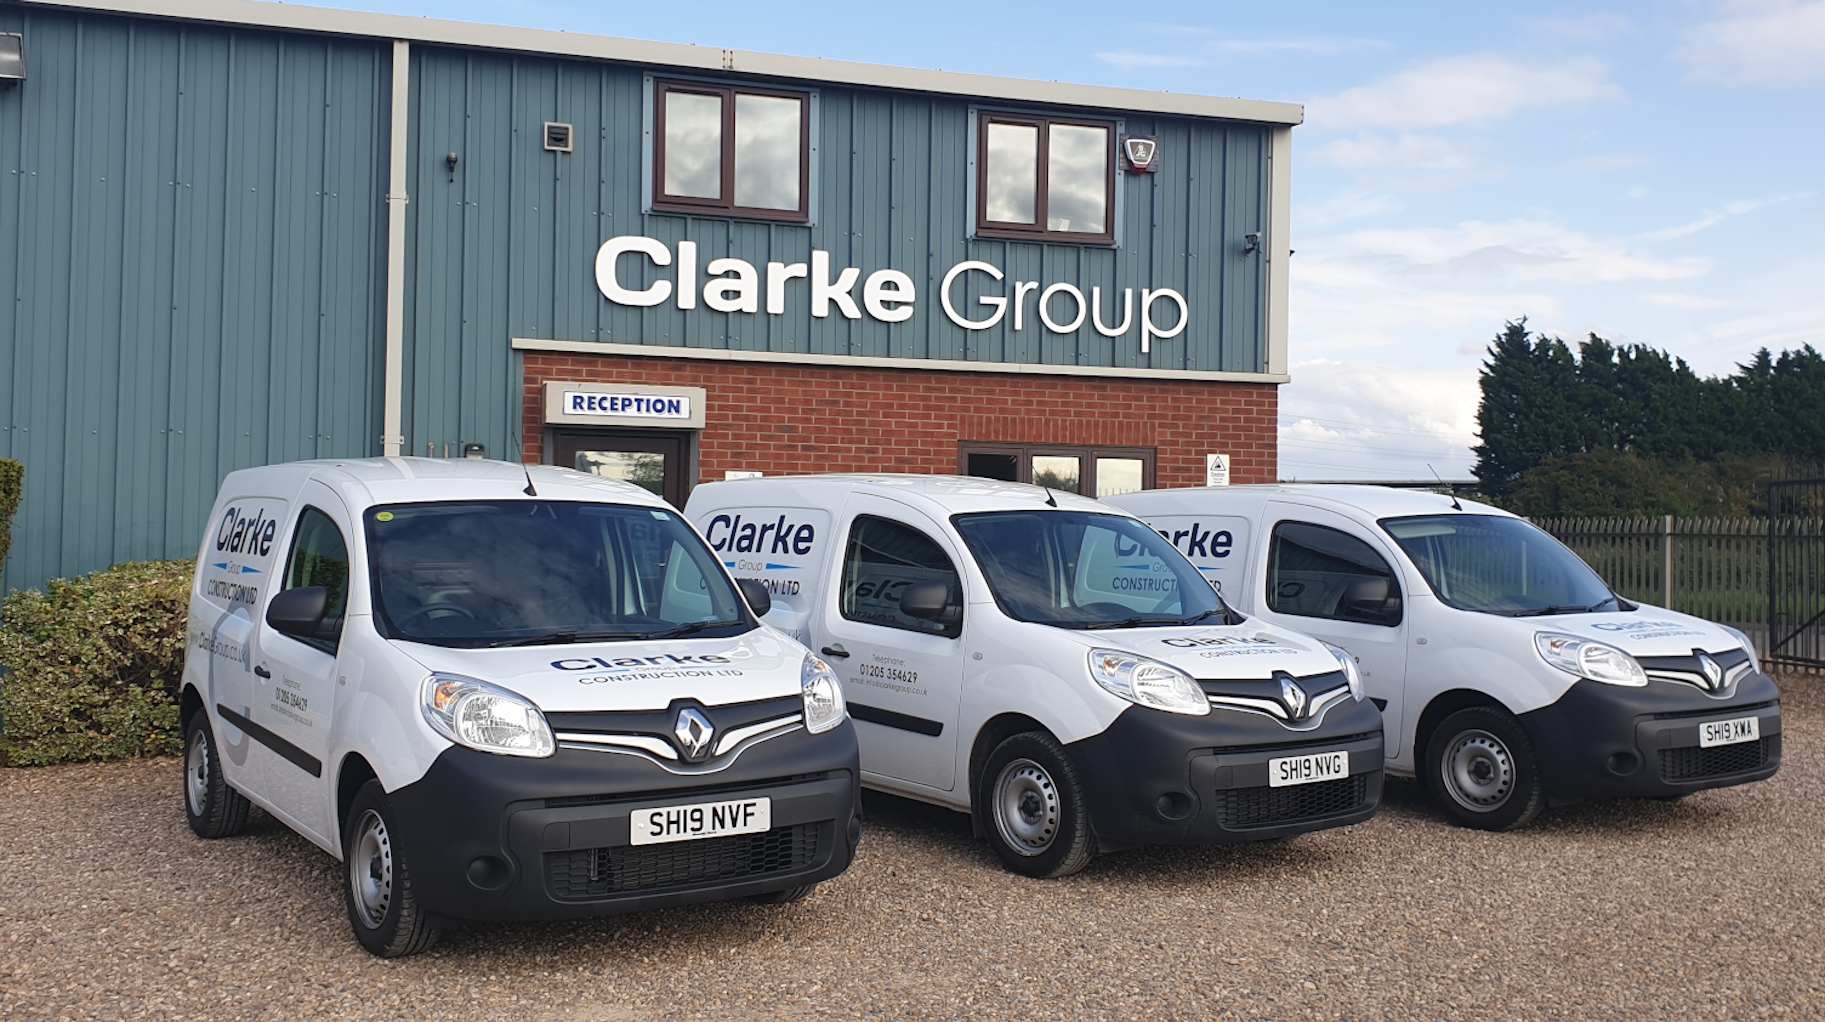 Clarke Group Continues to Grow